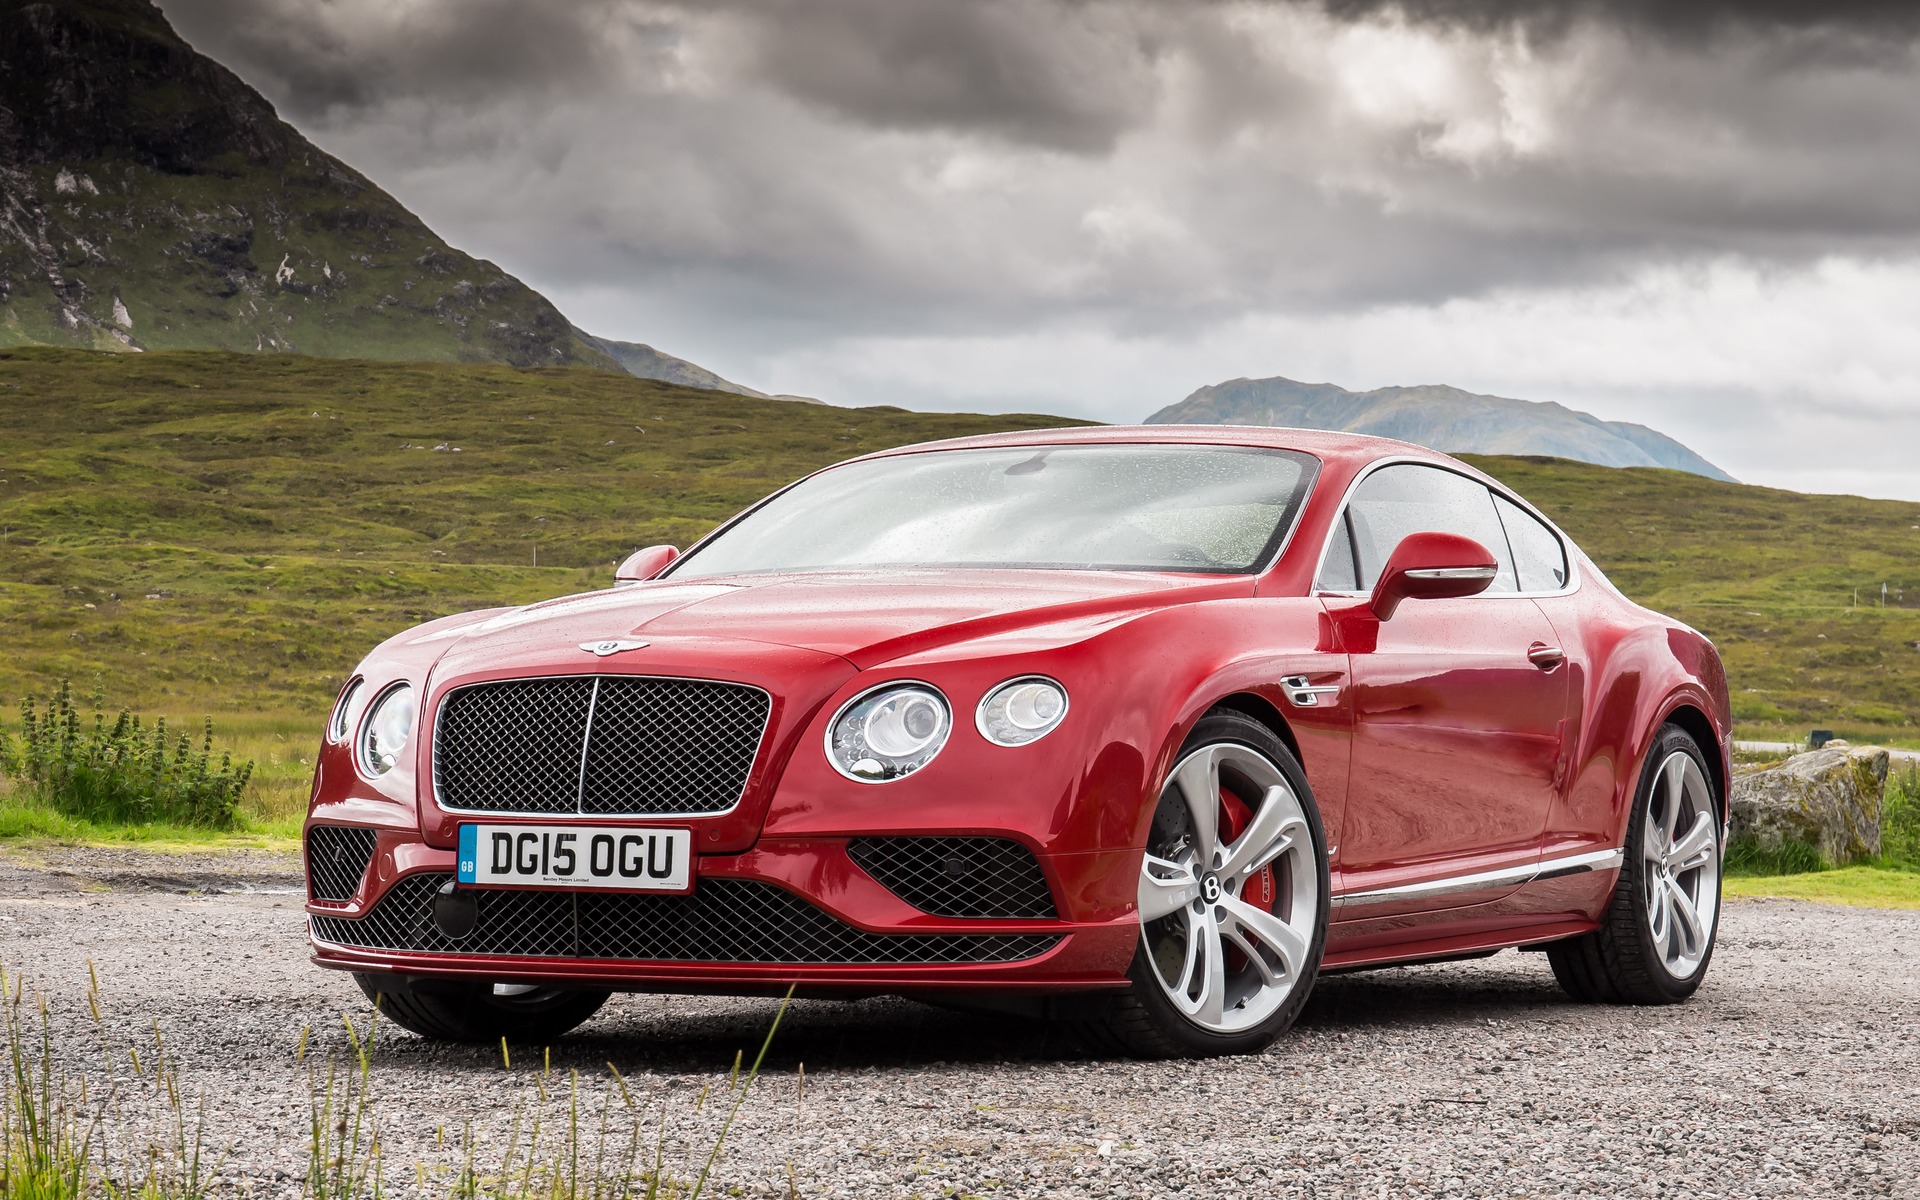 2017 Bentley Continental Gt V8 Specifications The Car Guide